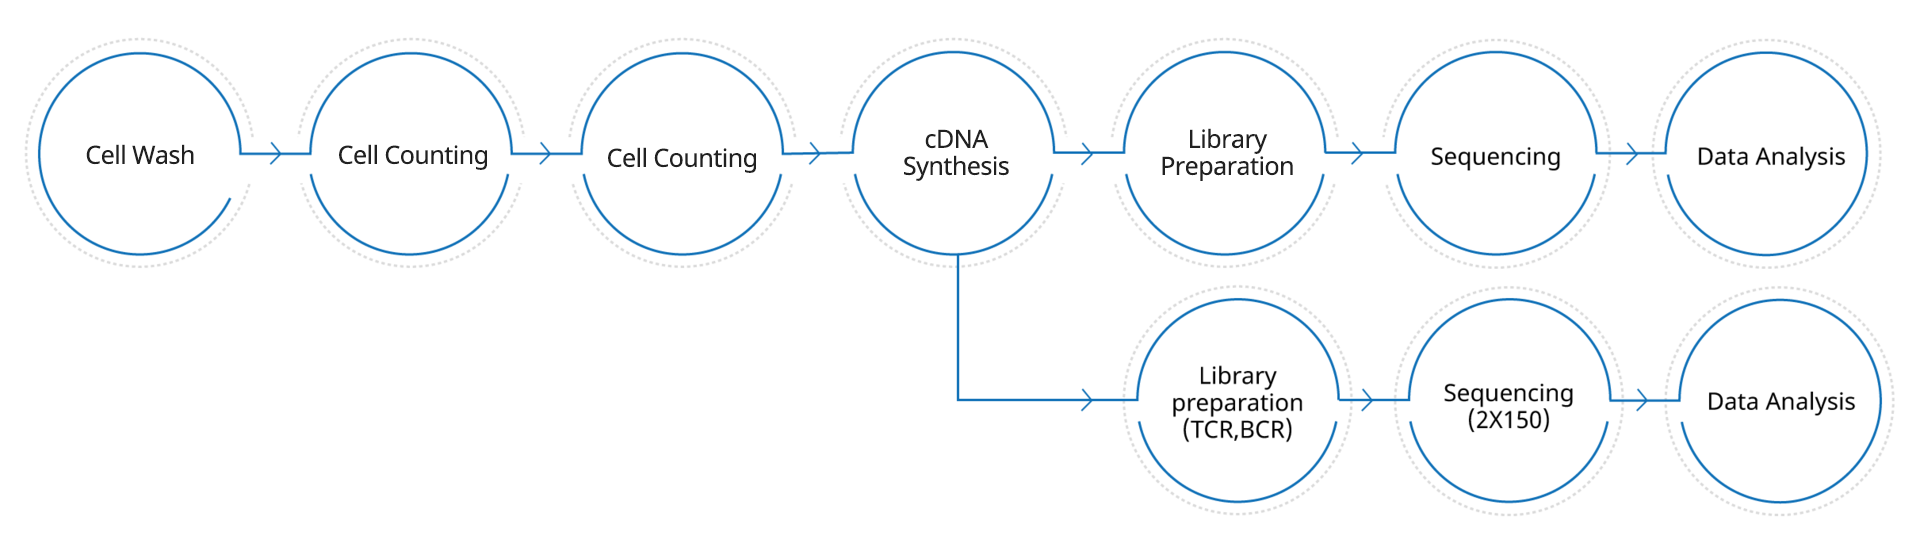 Cell wash, Cell counting, 10X GEM generation, cDNA synthesis, Library preparation, Sequencing, Data Analysis, TCR, BCR , Sequencing(2X150), Data Analysis